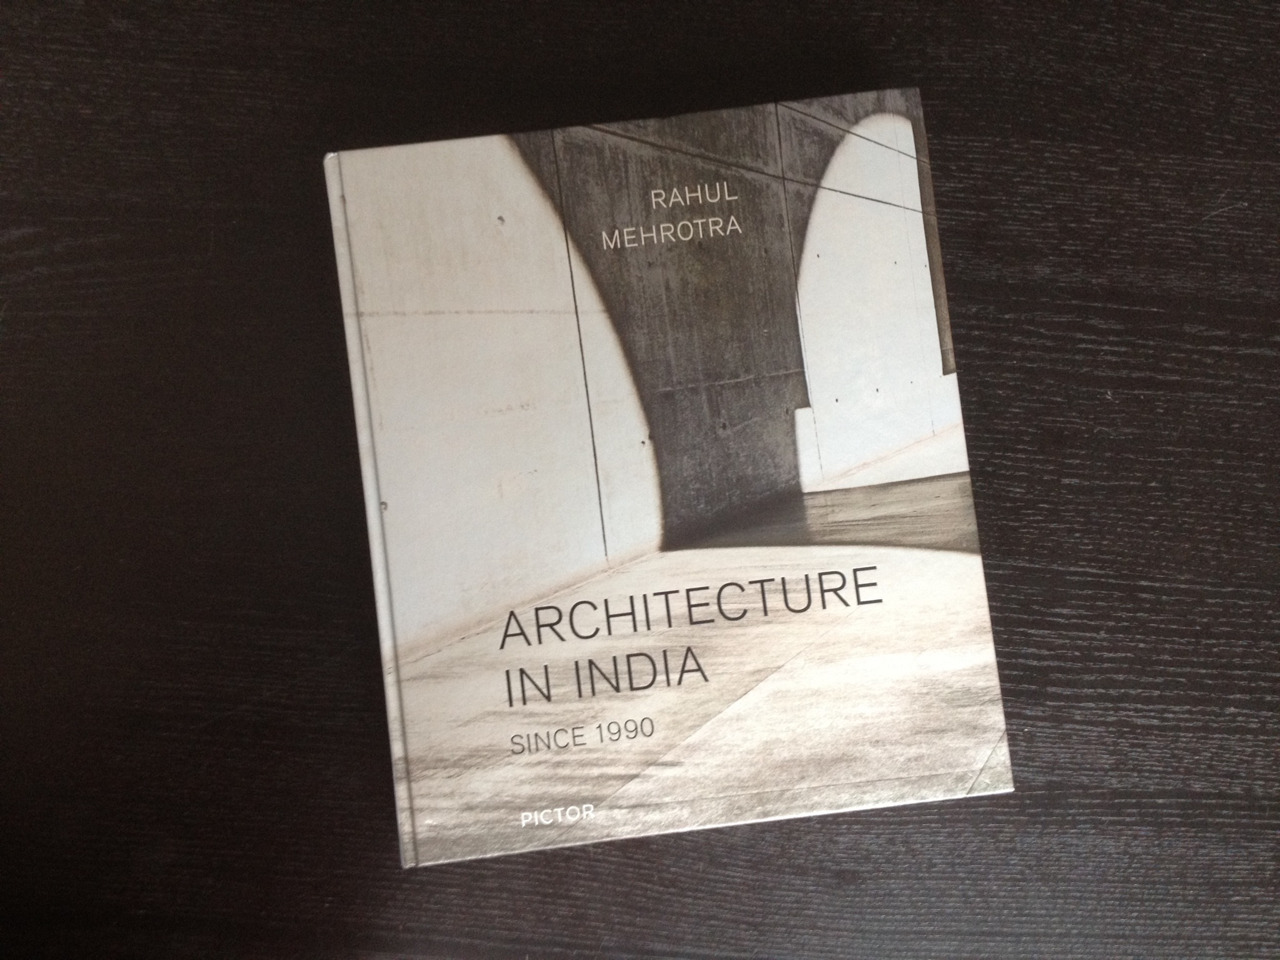 Architecture in India Since 1990 by Rahul Mehrotra